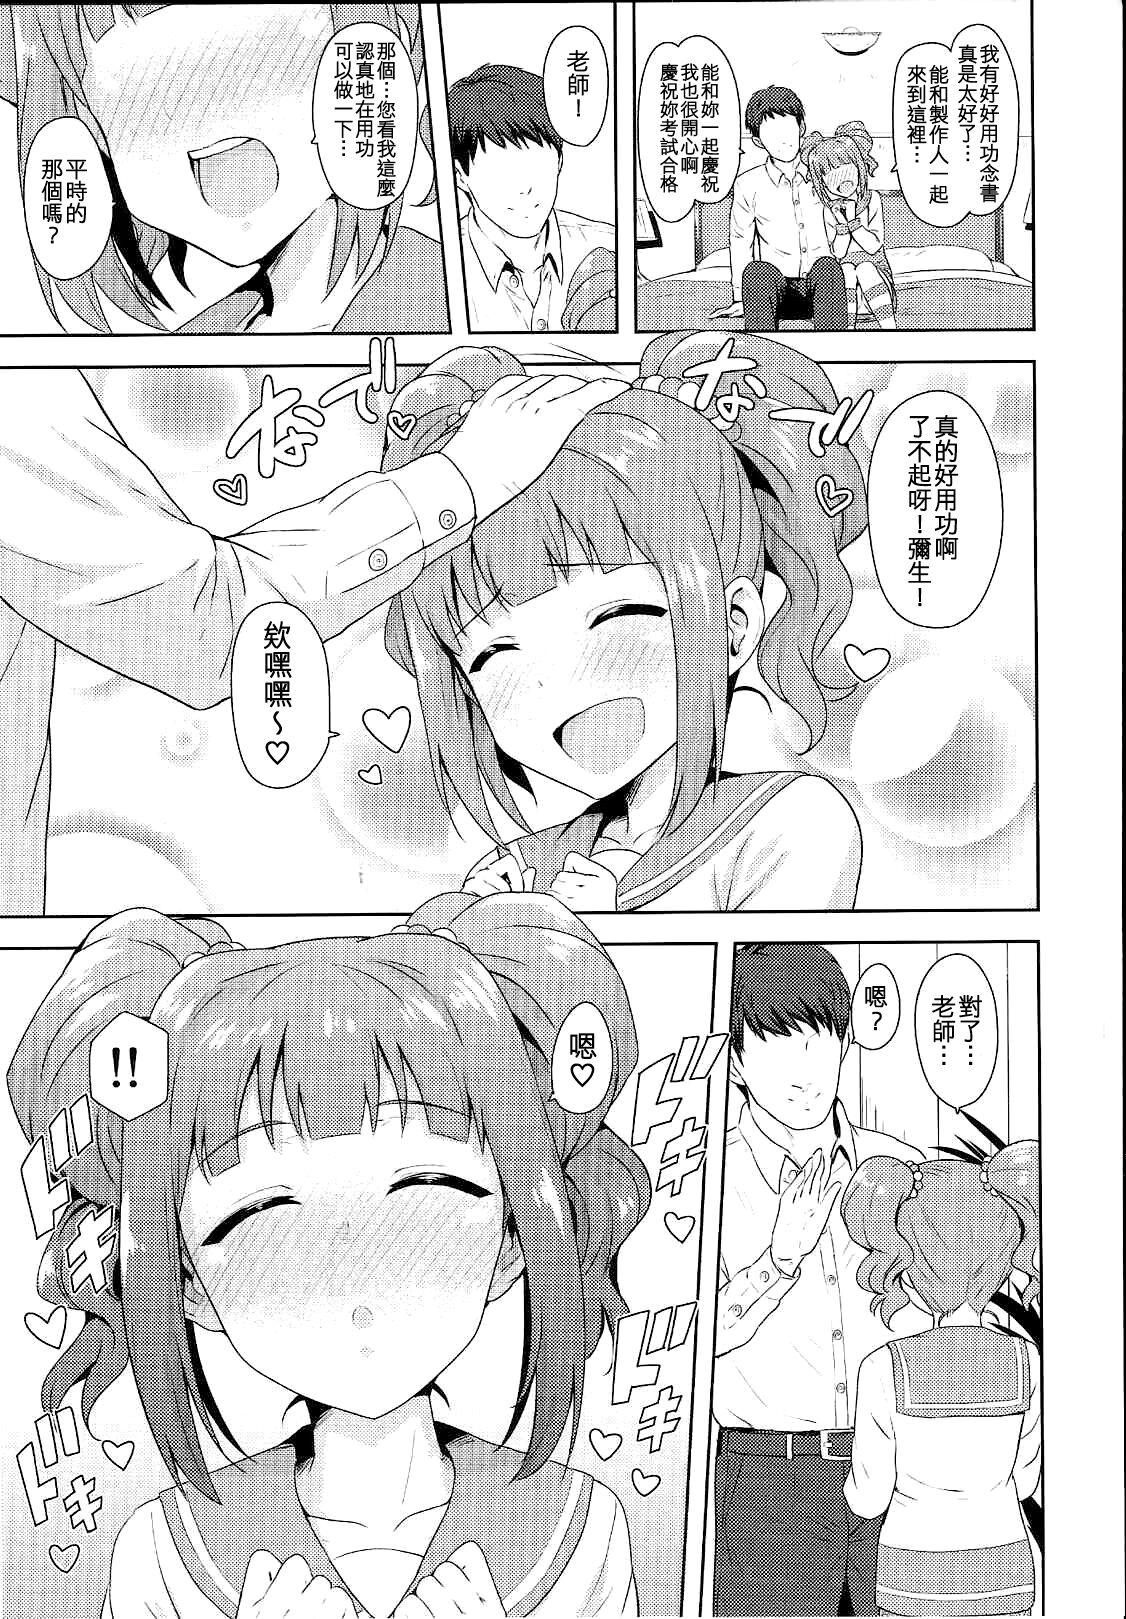 Mallu Yayoi to Issho 2 - The idolmaster Wet Cunt - Page 5